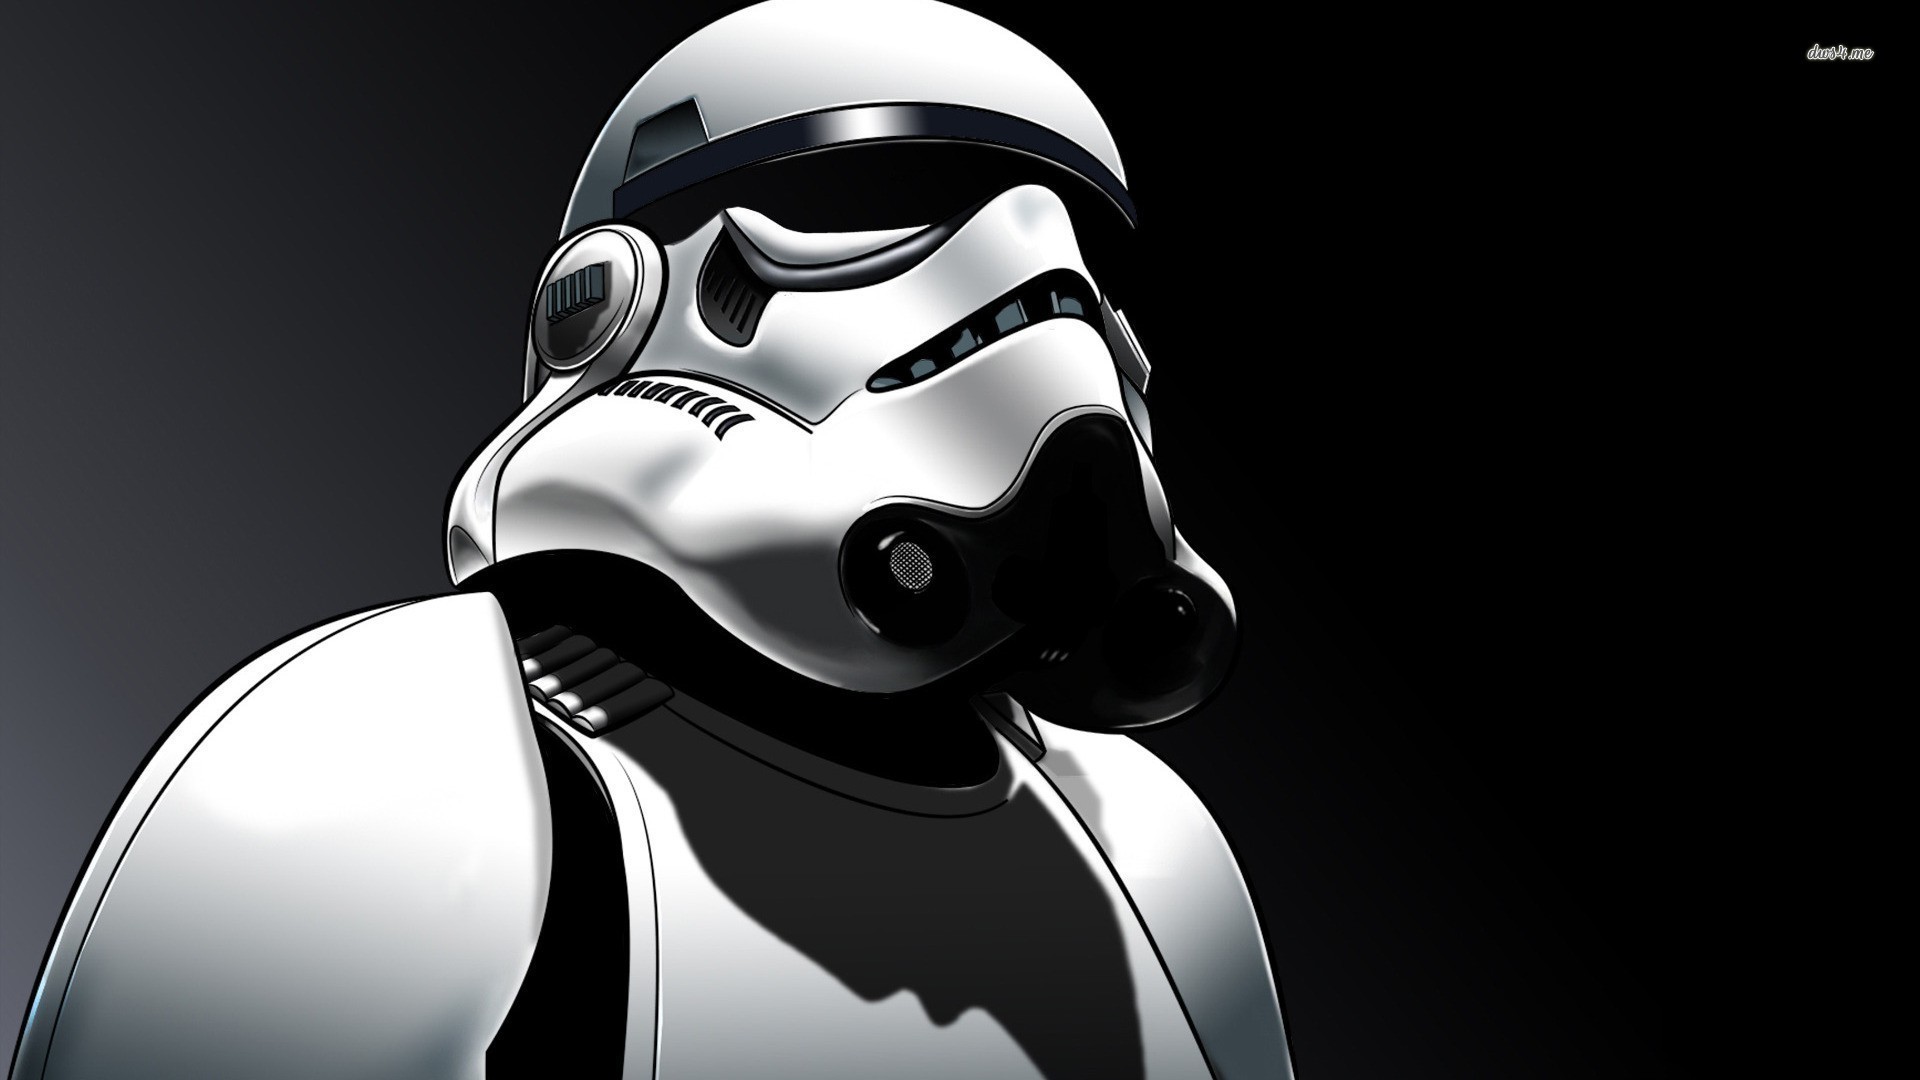 1920x1080 Star Wars Wallpapers HD and Widescreen | Stormtrooper Star Wars .